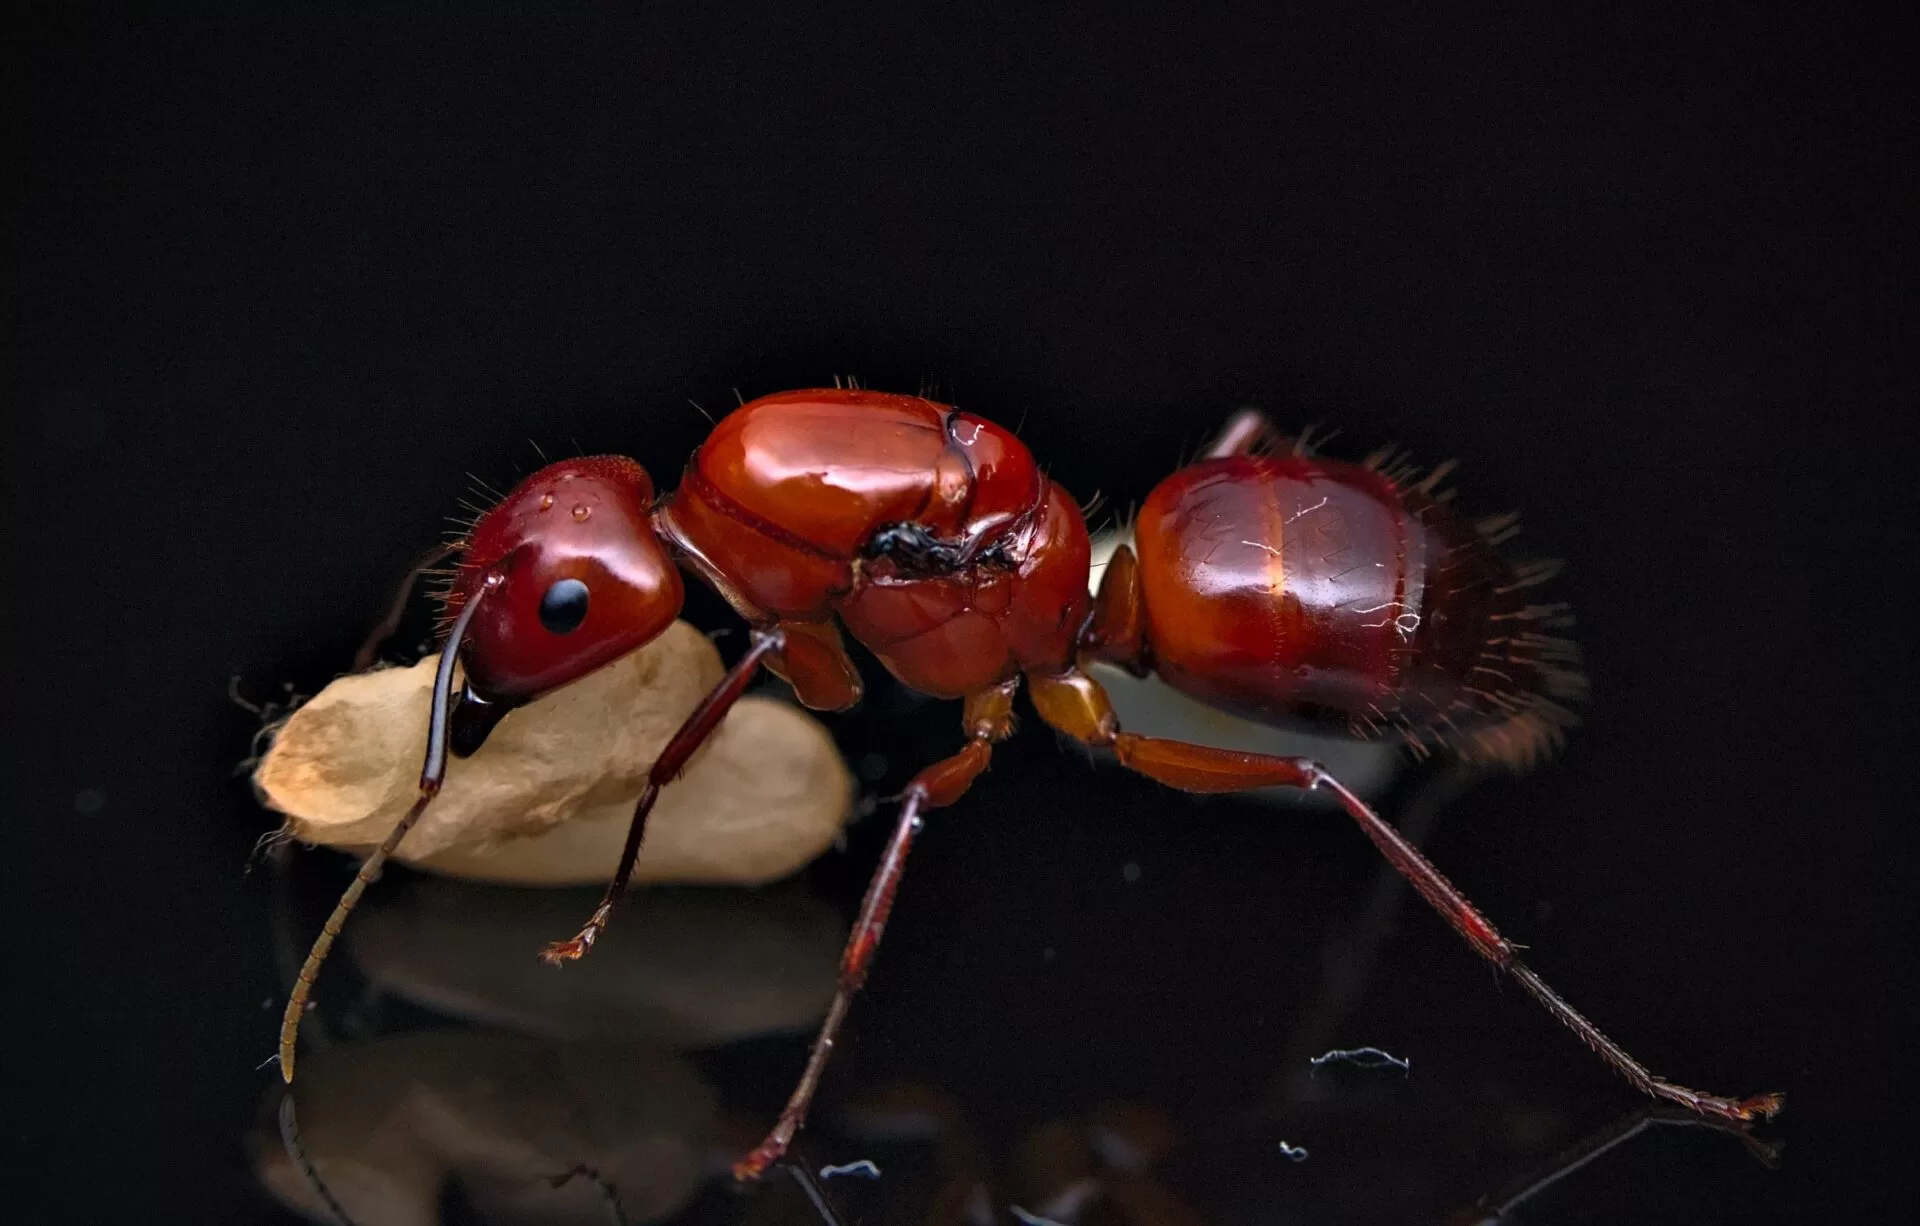 A Camponotus castaneus queen carries a pupa.